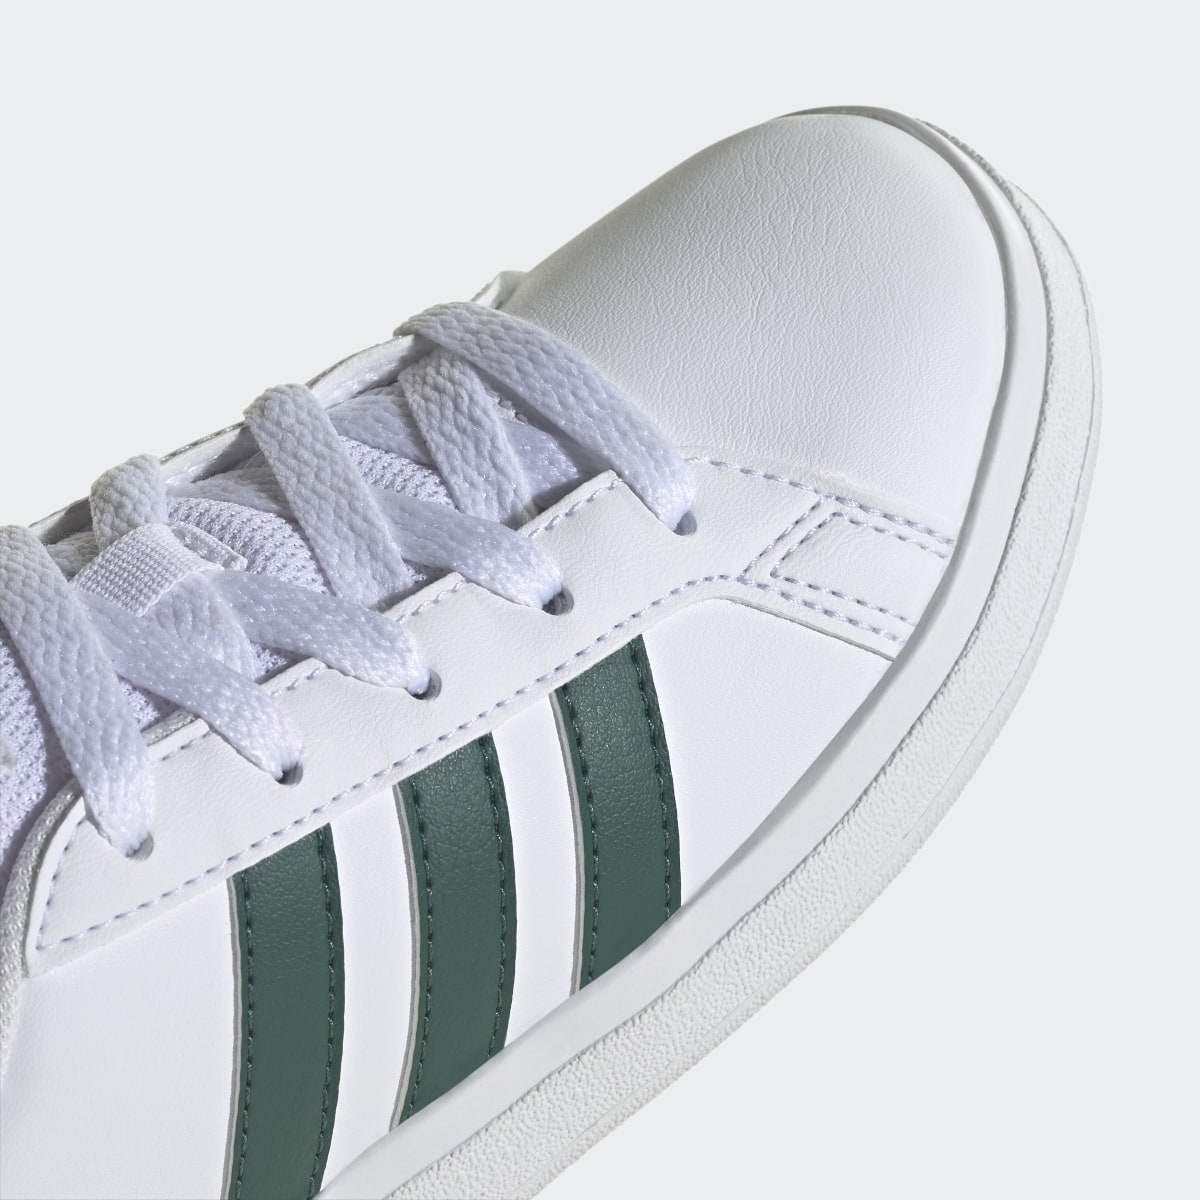 Adidas Grand Court Lifestyle Tennis Lace-Up Schuh. 9